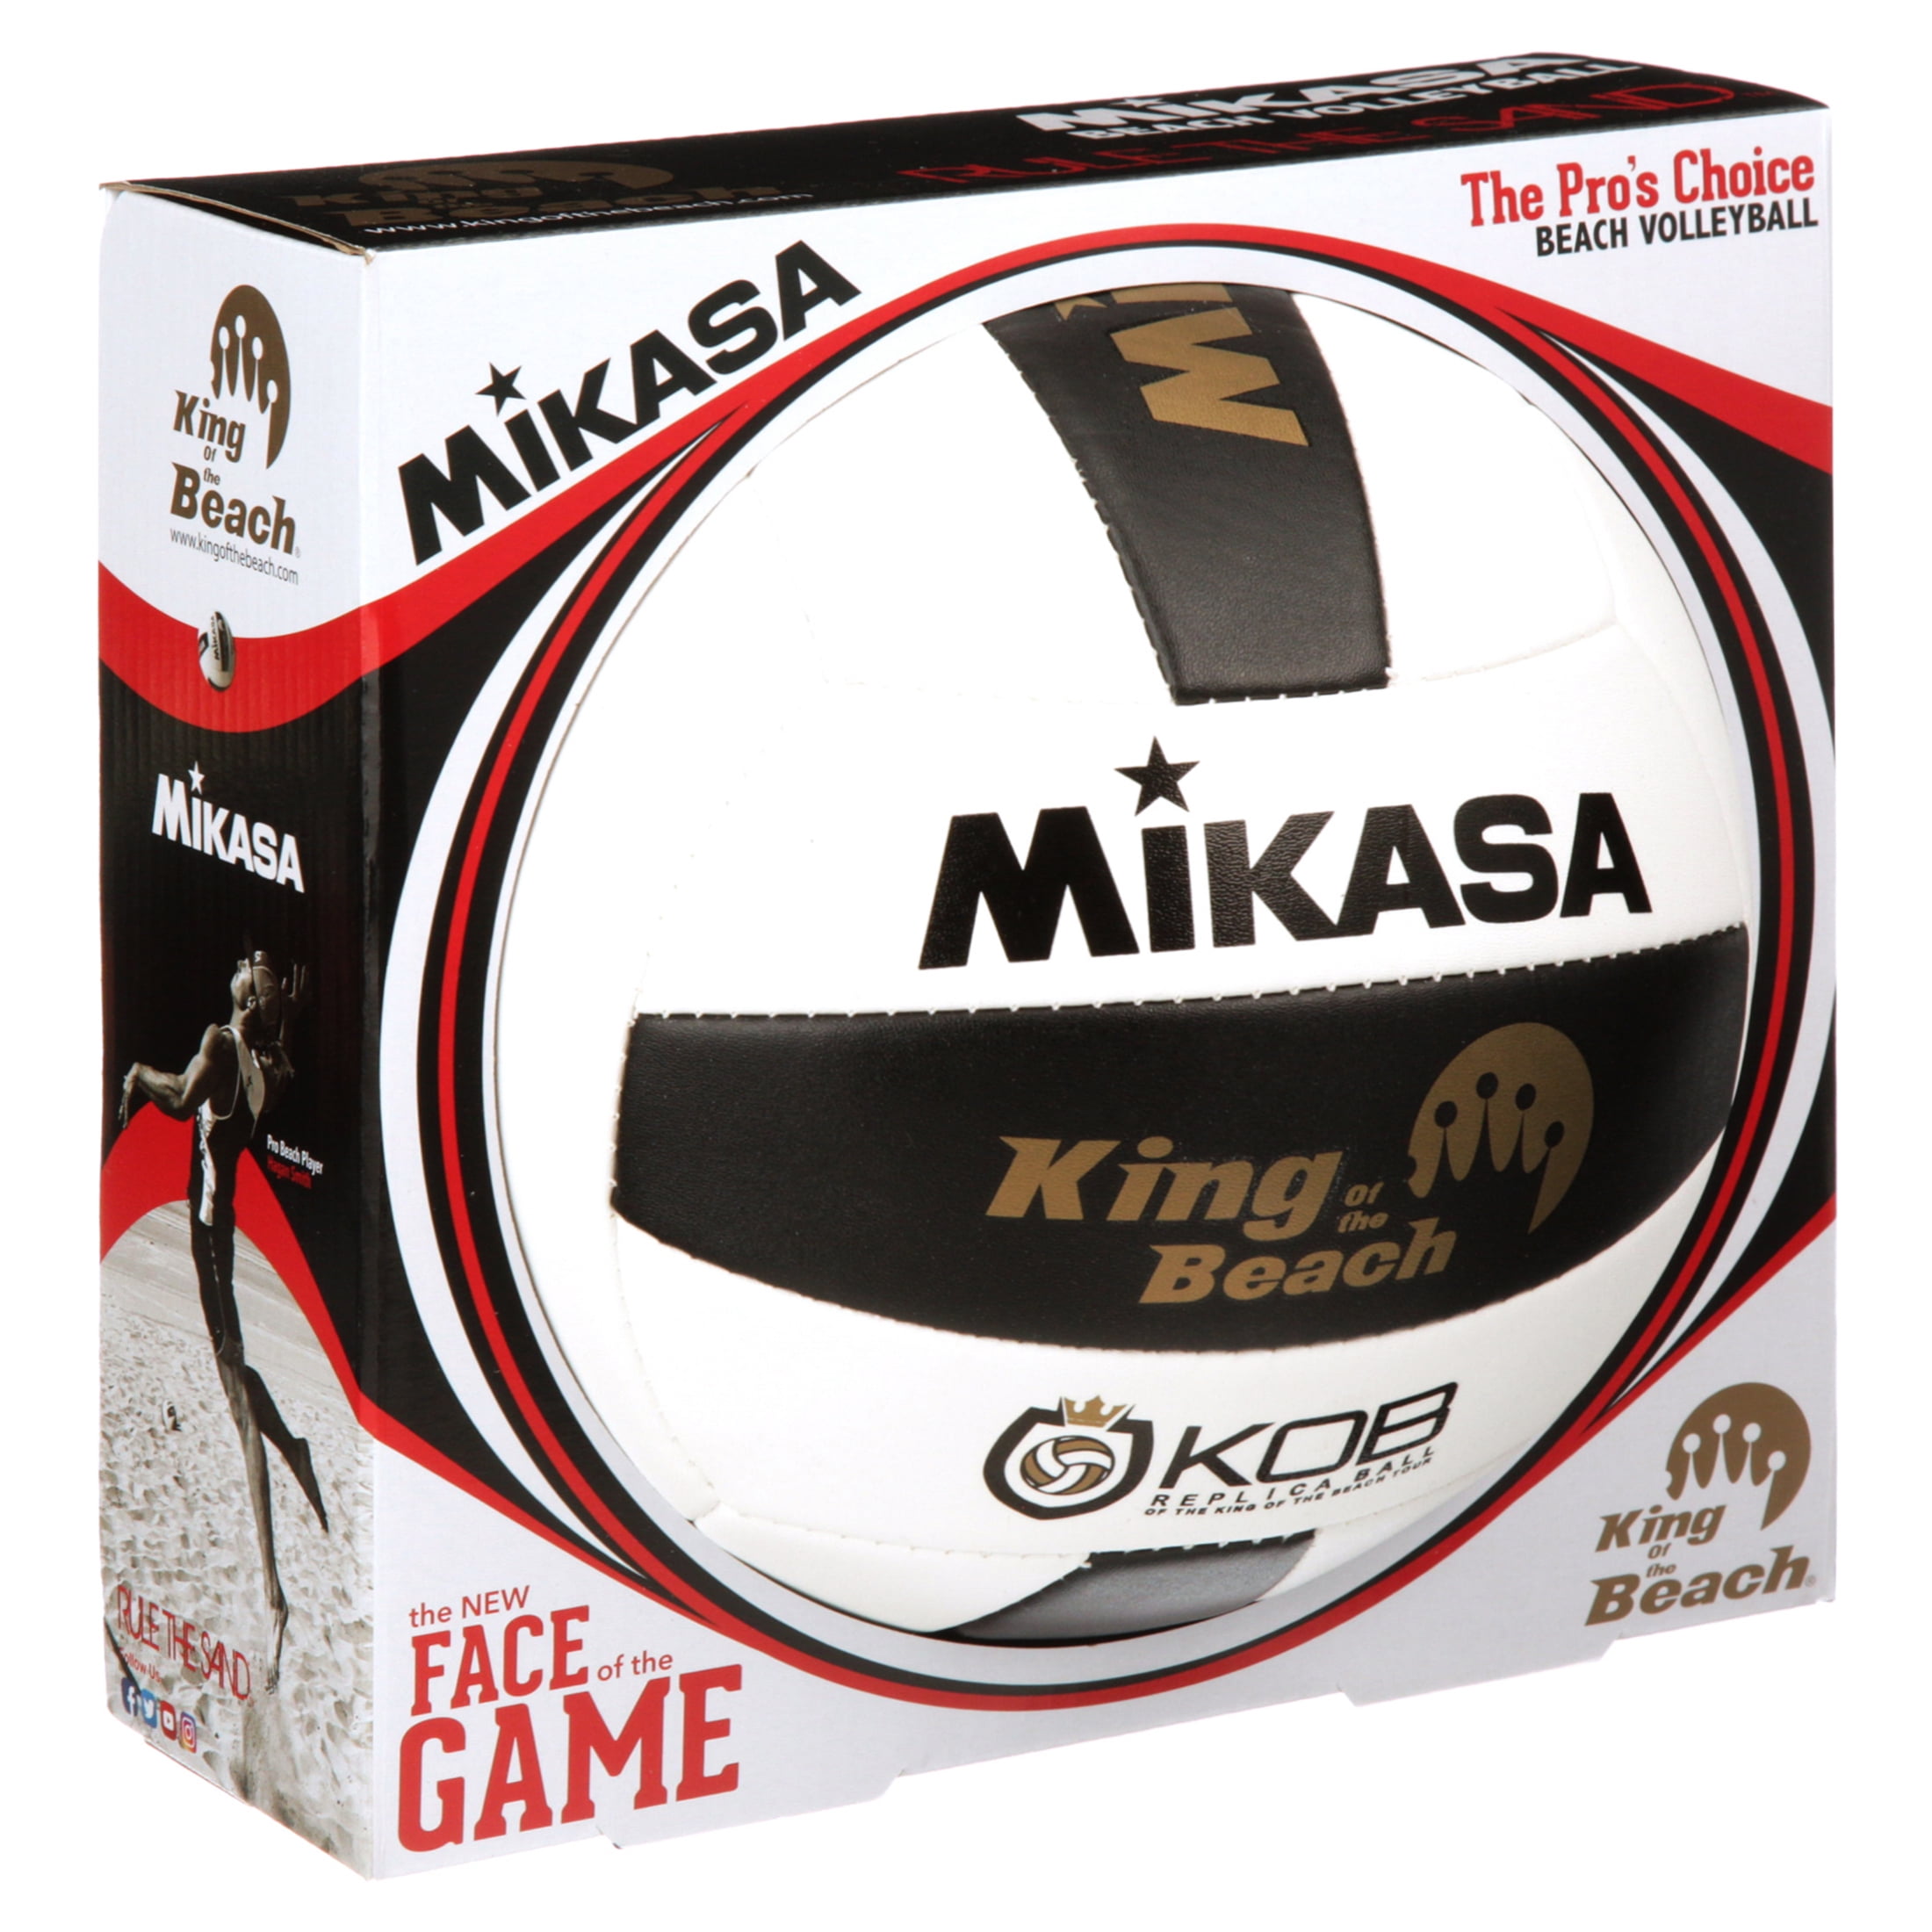 Mikasa Official Sized King of the Beach Tour Replica Volleyball